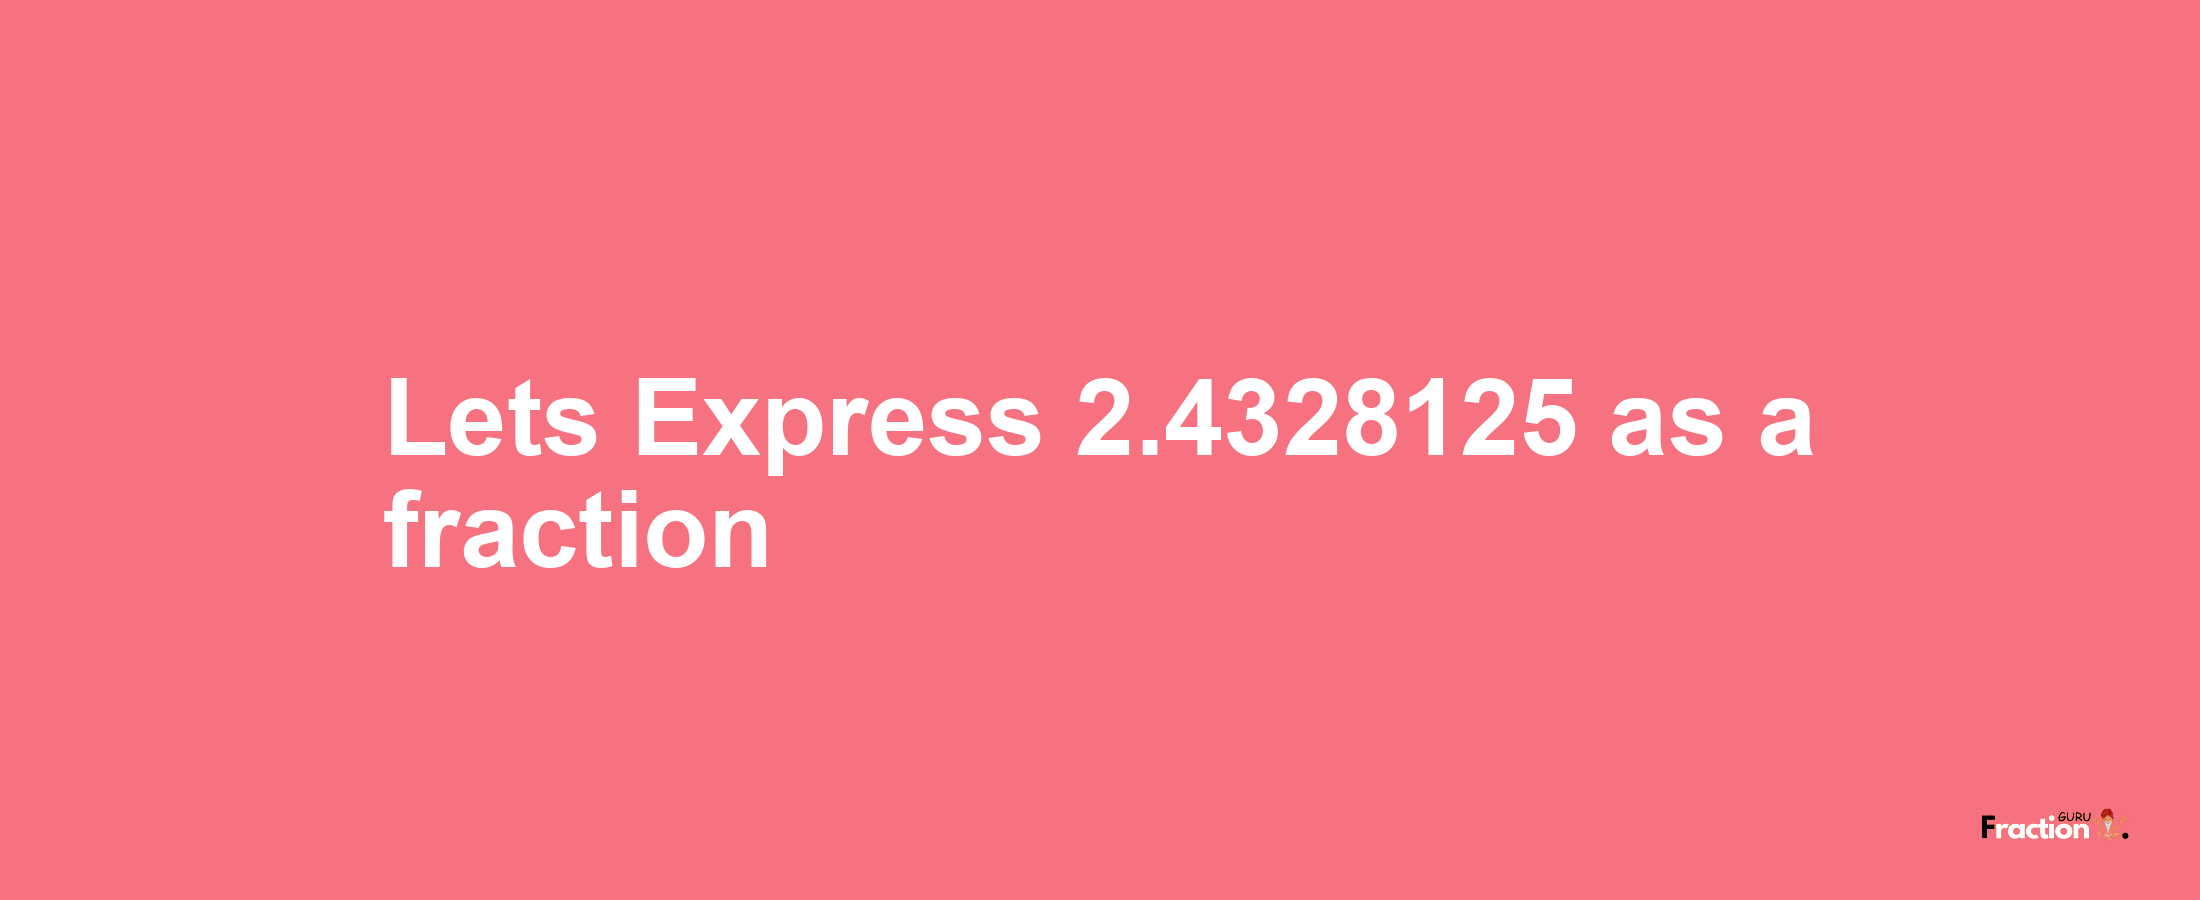 Lets Express 2.4328125 as afraction